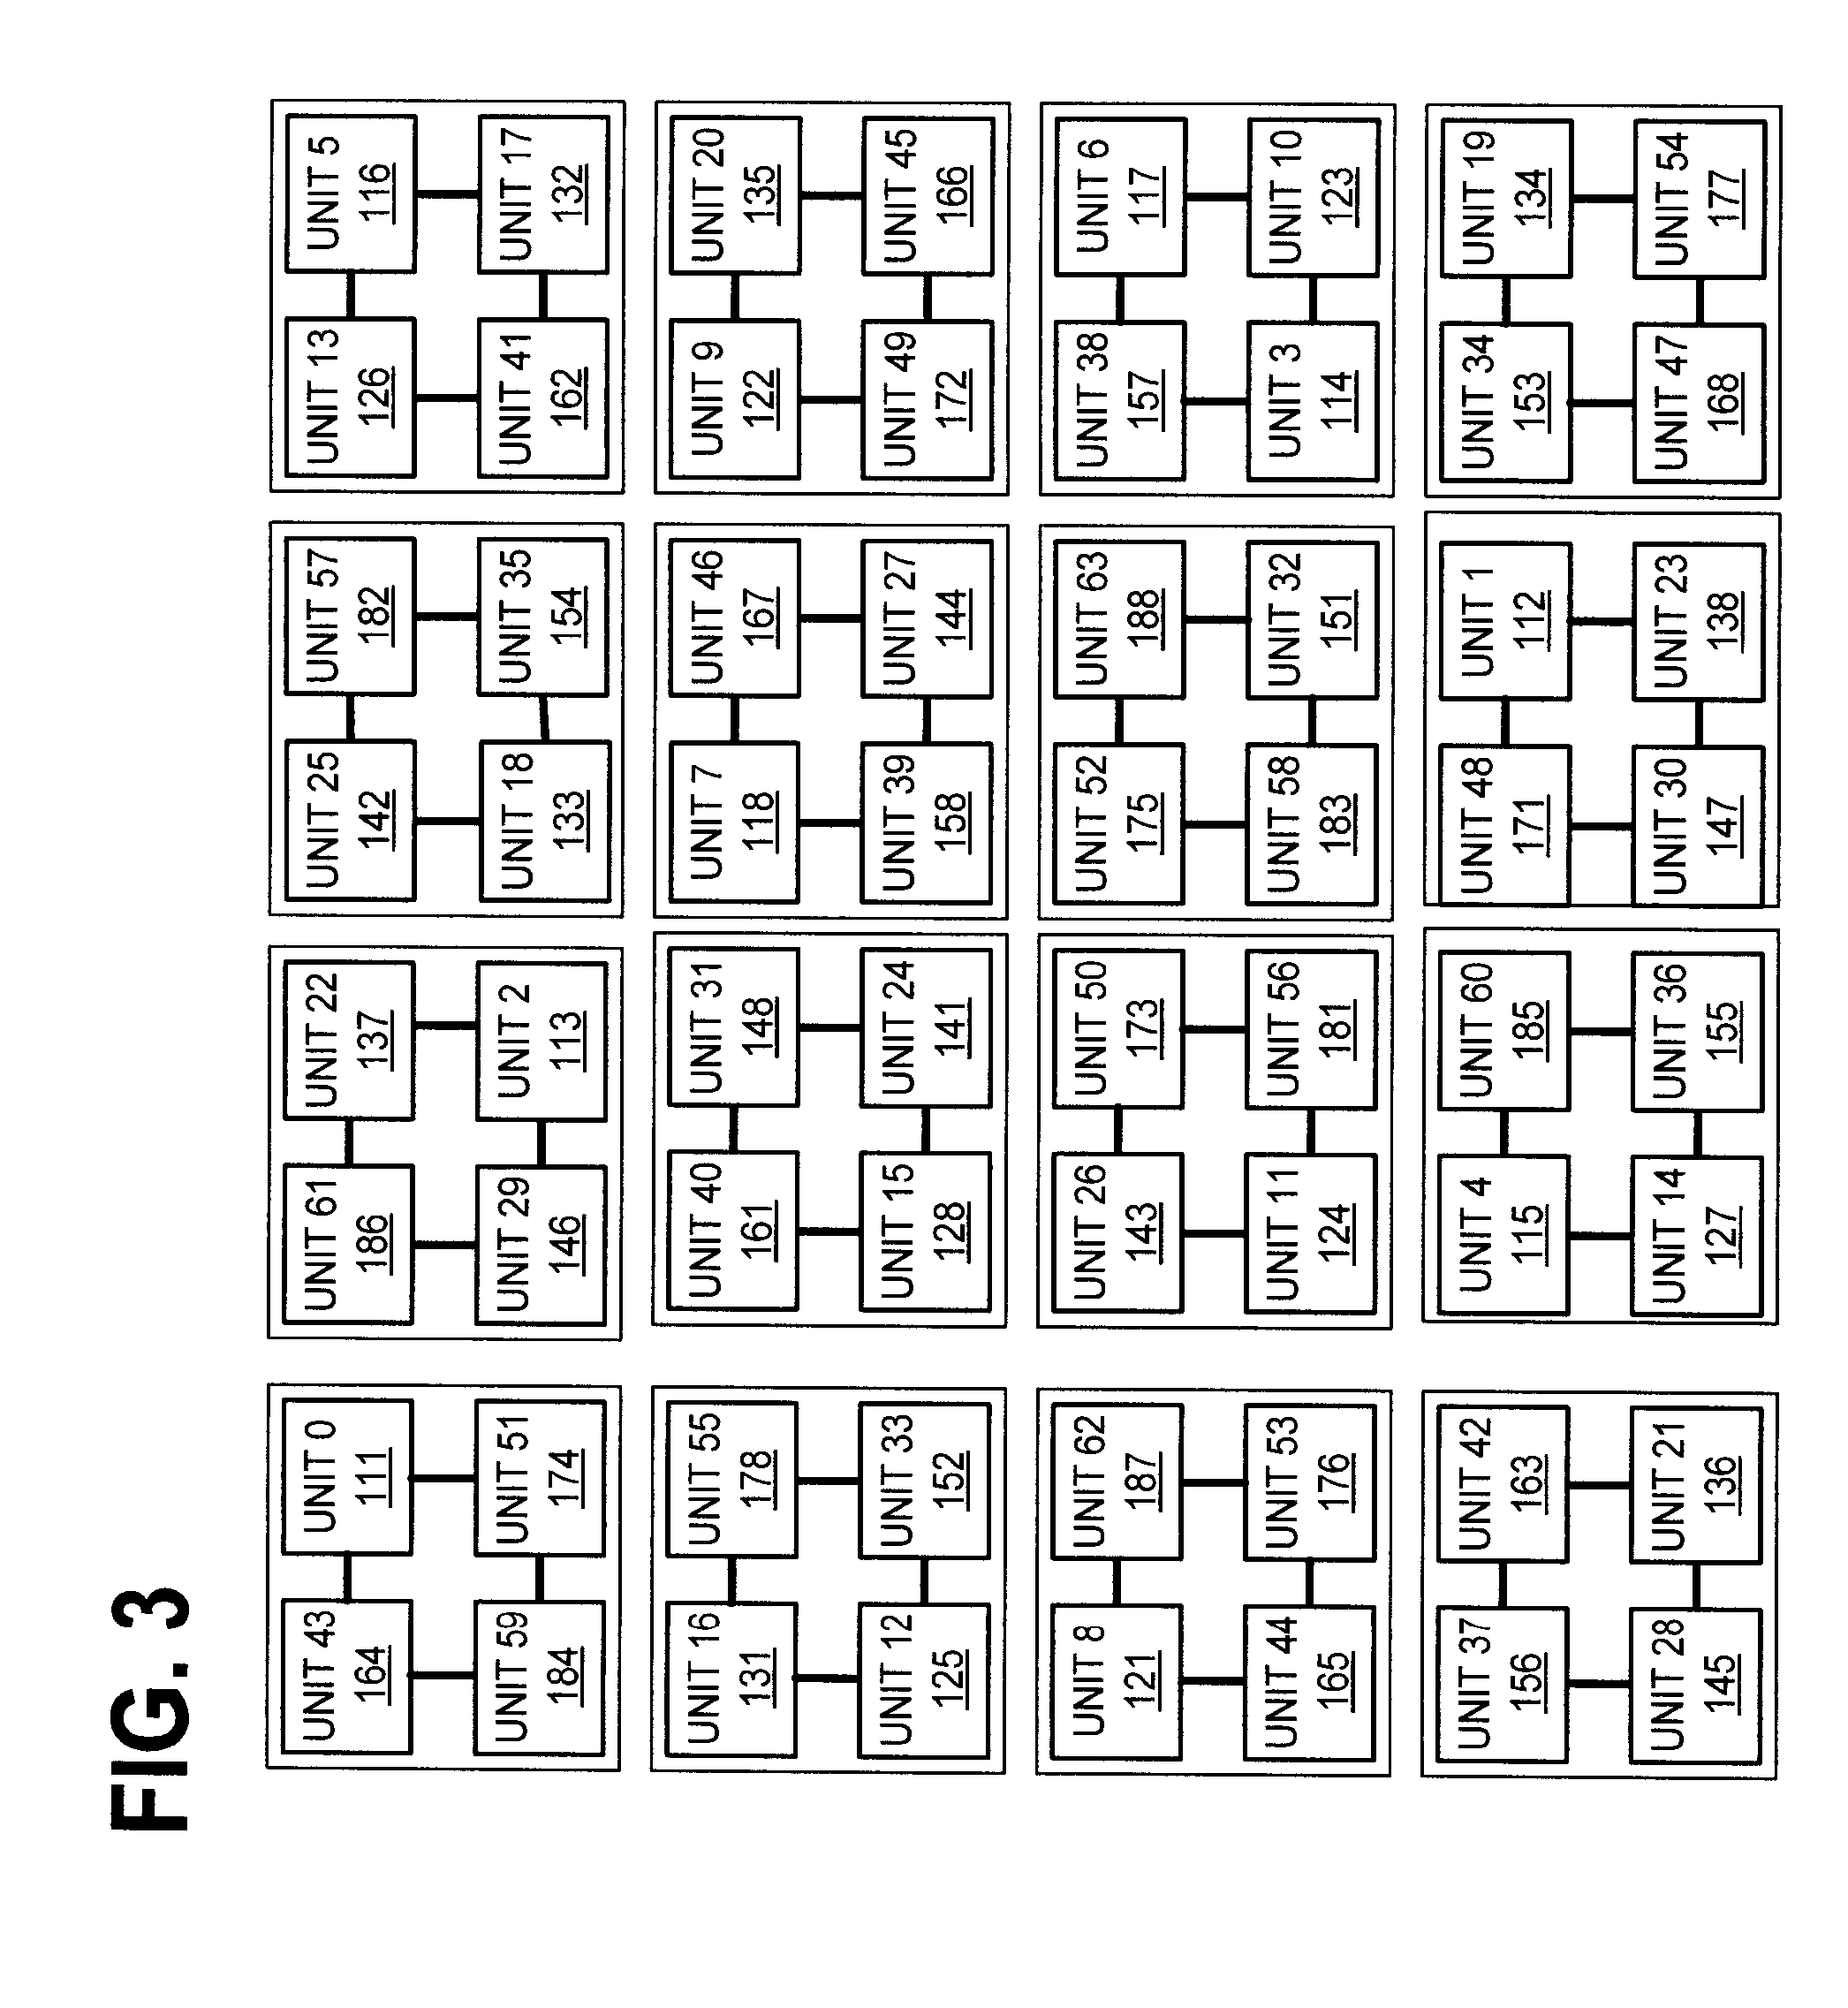 System and method to efficiently identify bad components in a multi-node system utilizing multiple node topologies